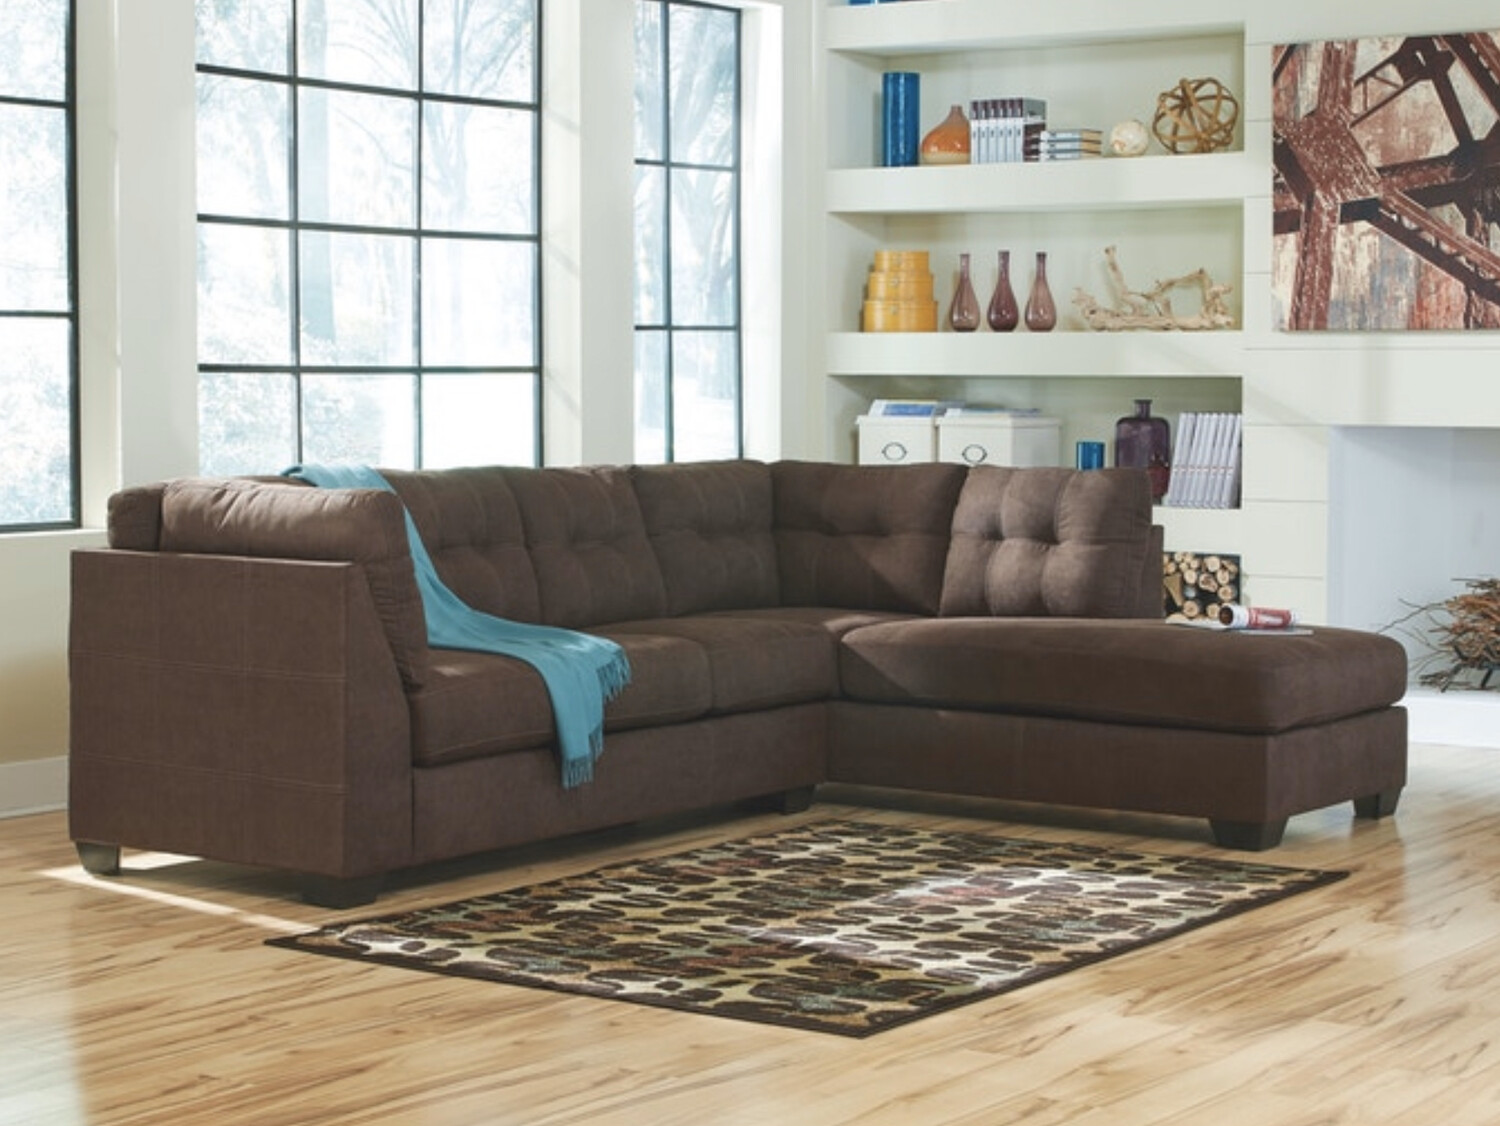 Maier sectional